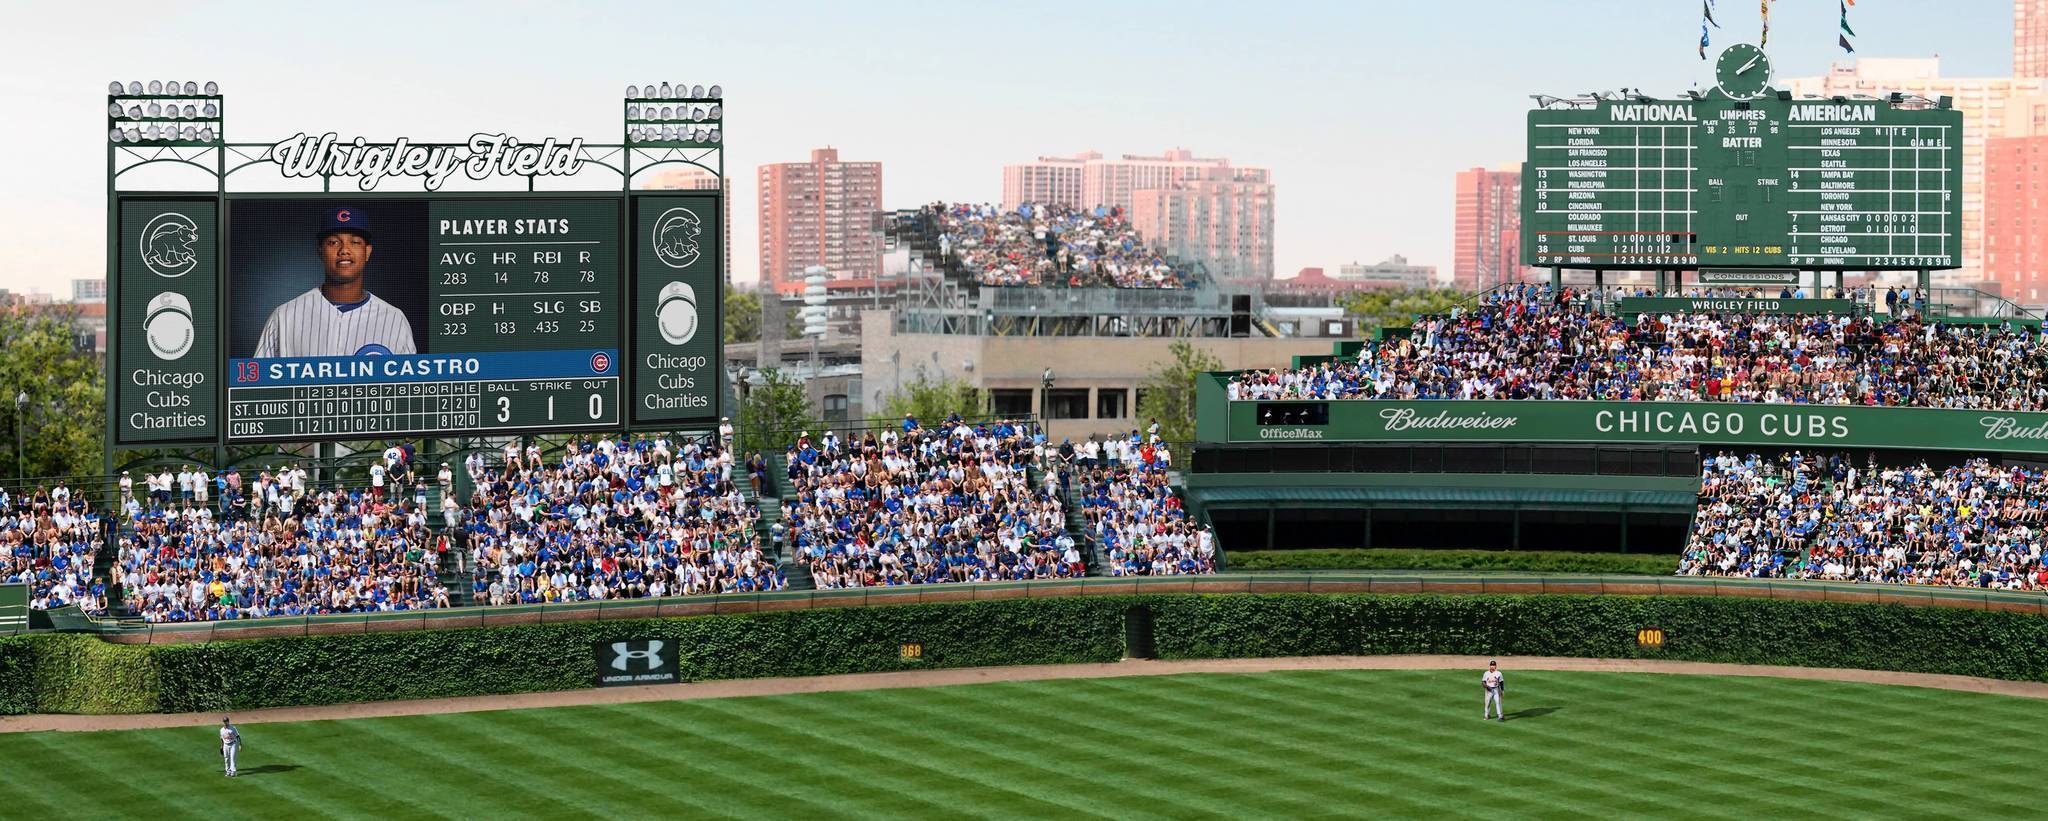 Cubs Unveil Wrigley Field Renovation Designs; Outfield Scoreboard Remains  Hot Topic